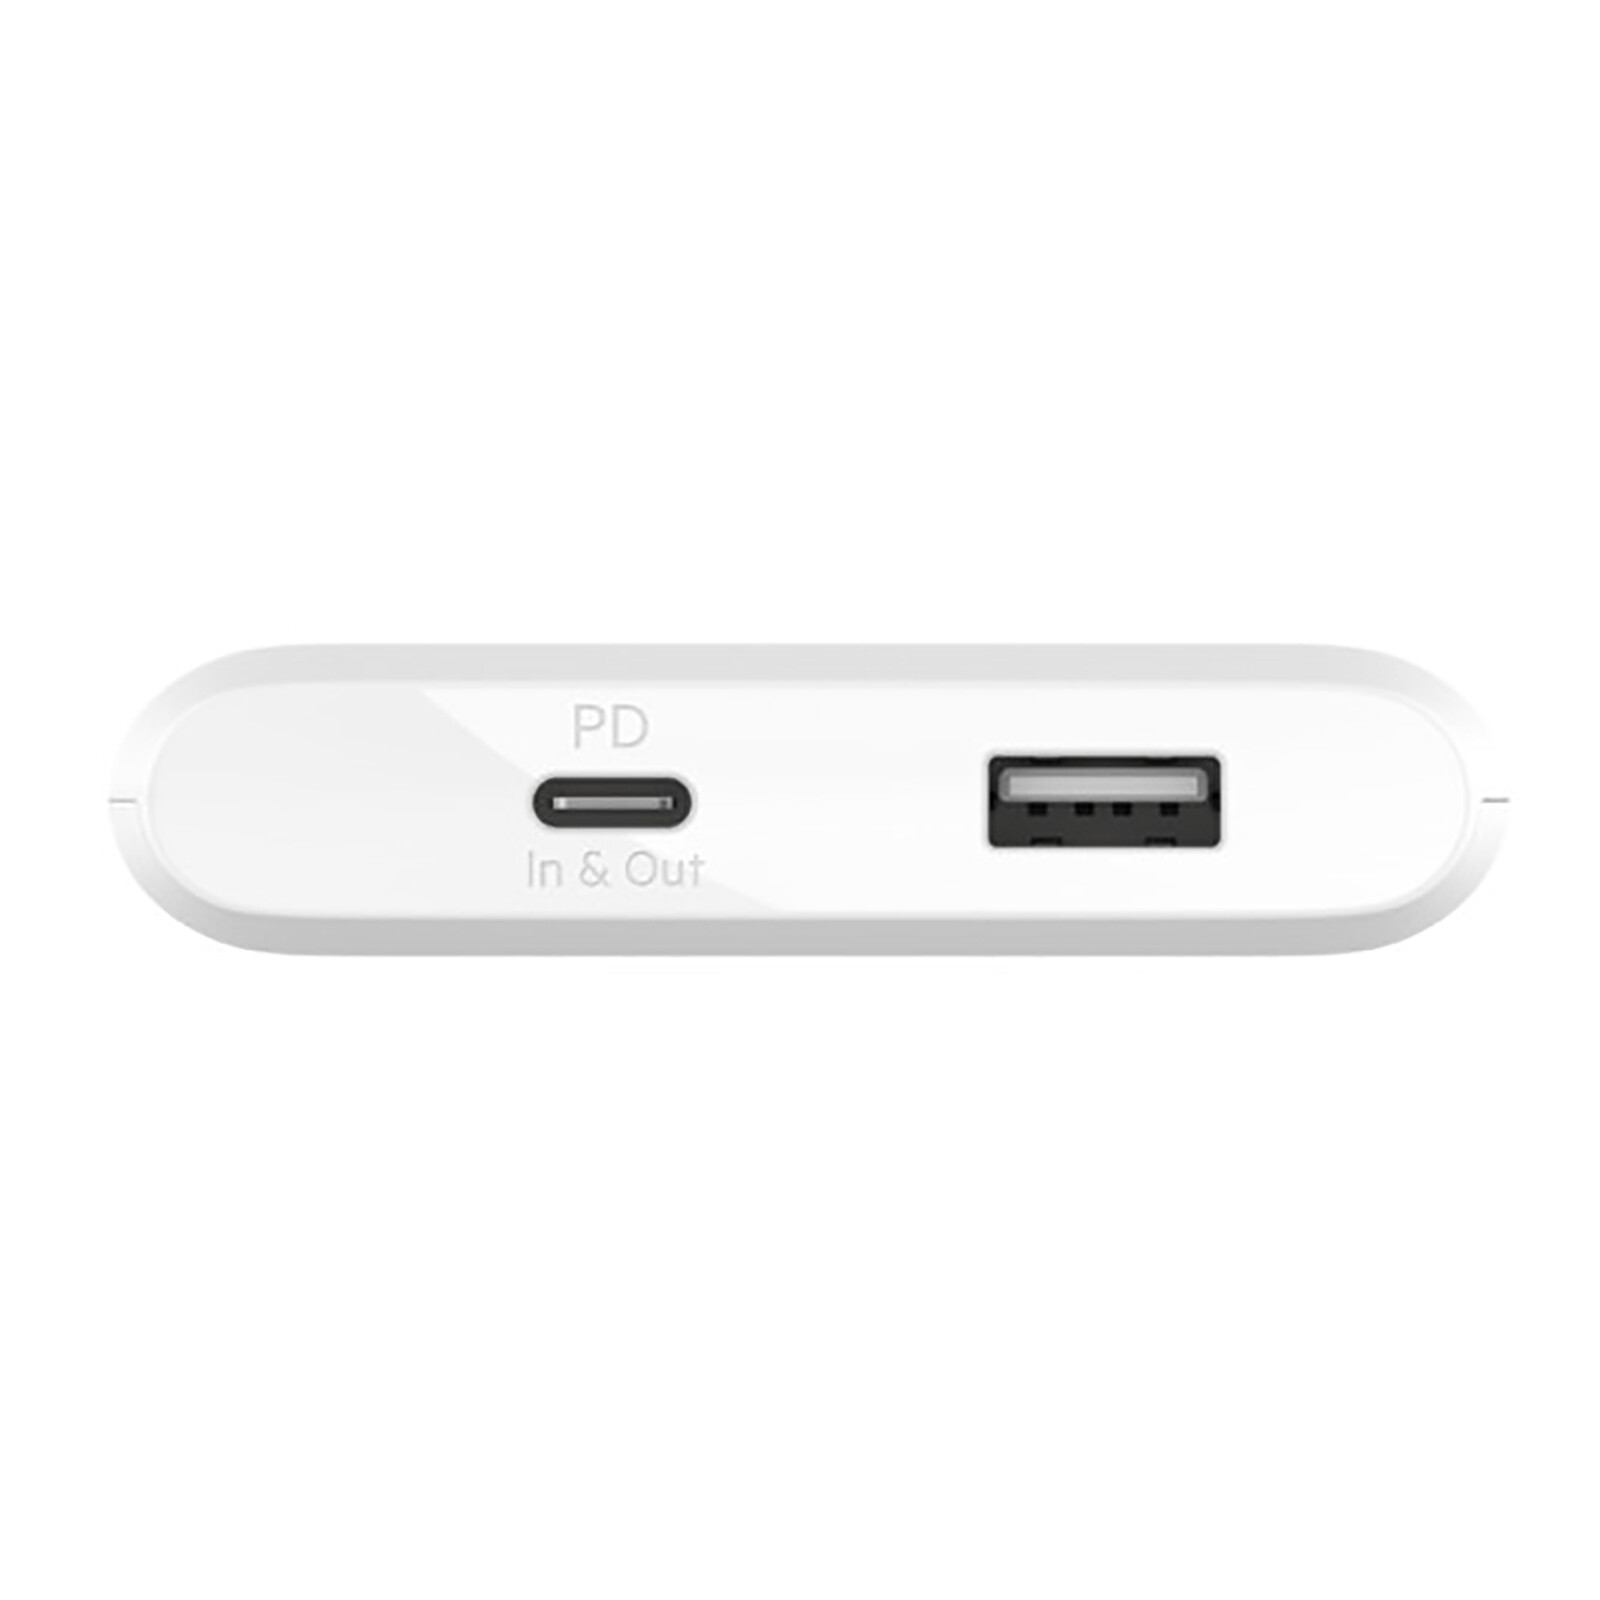 10K USB-C PD Power Bank with Integrated Cables, Belkin